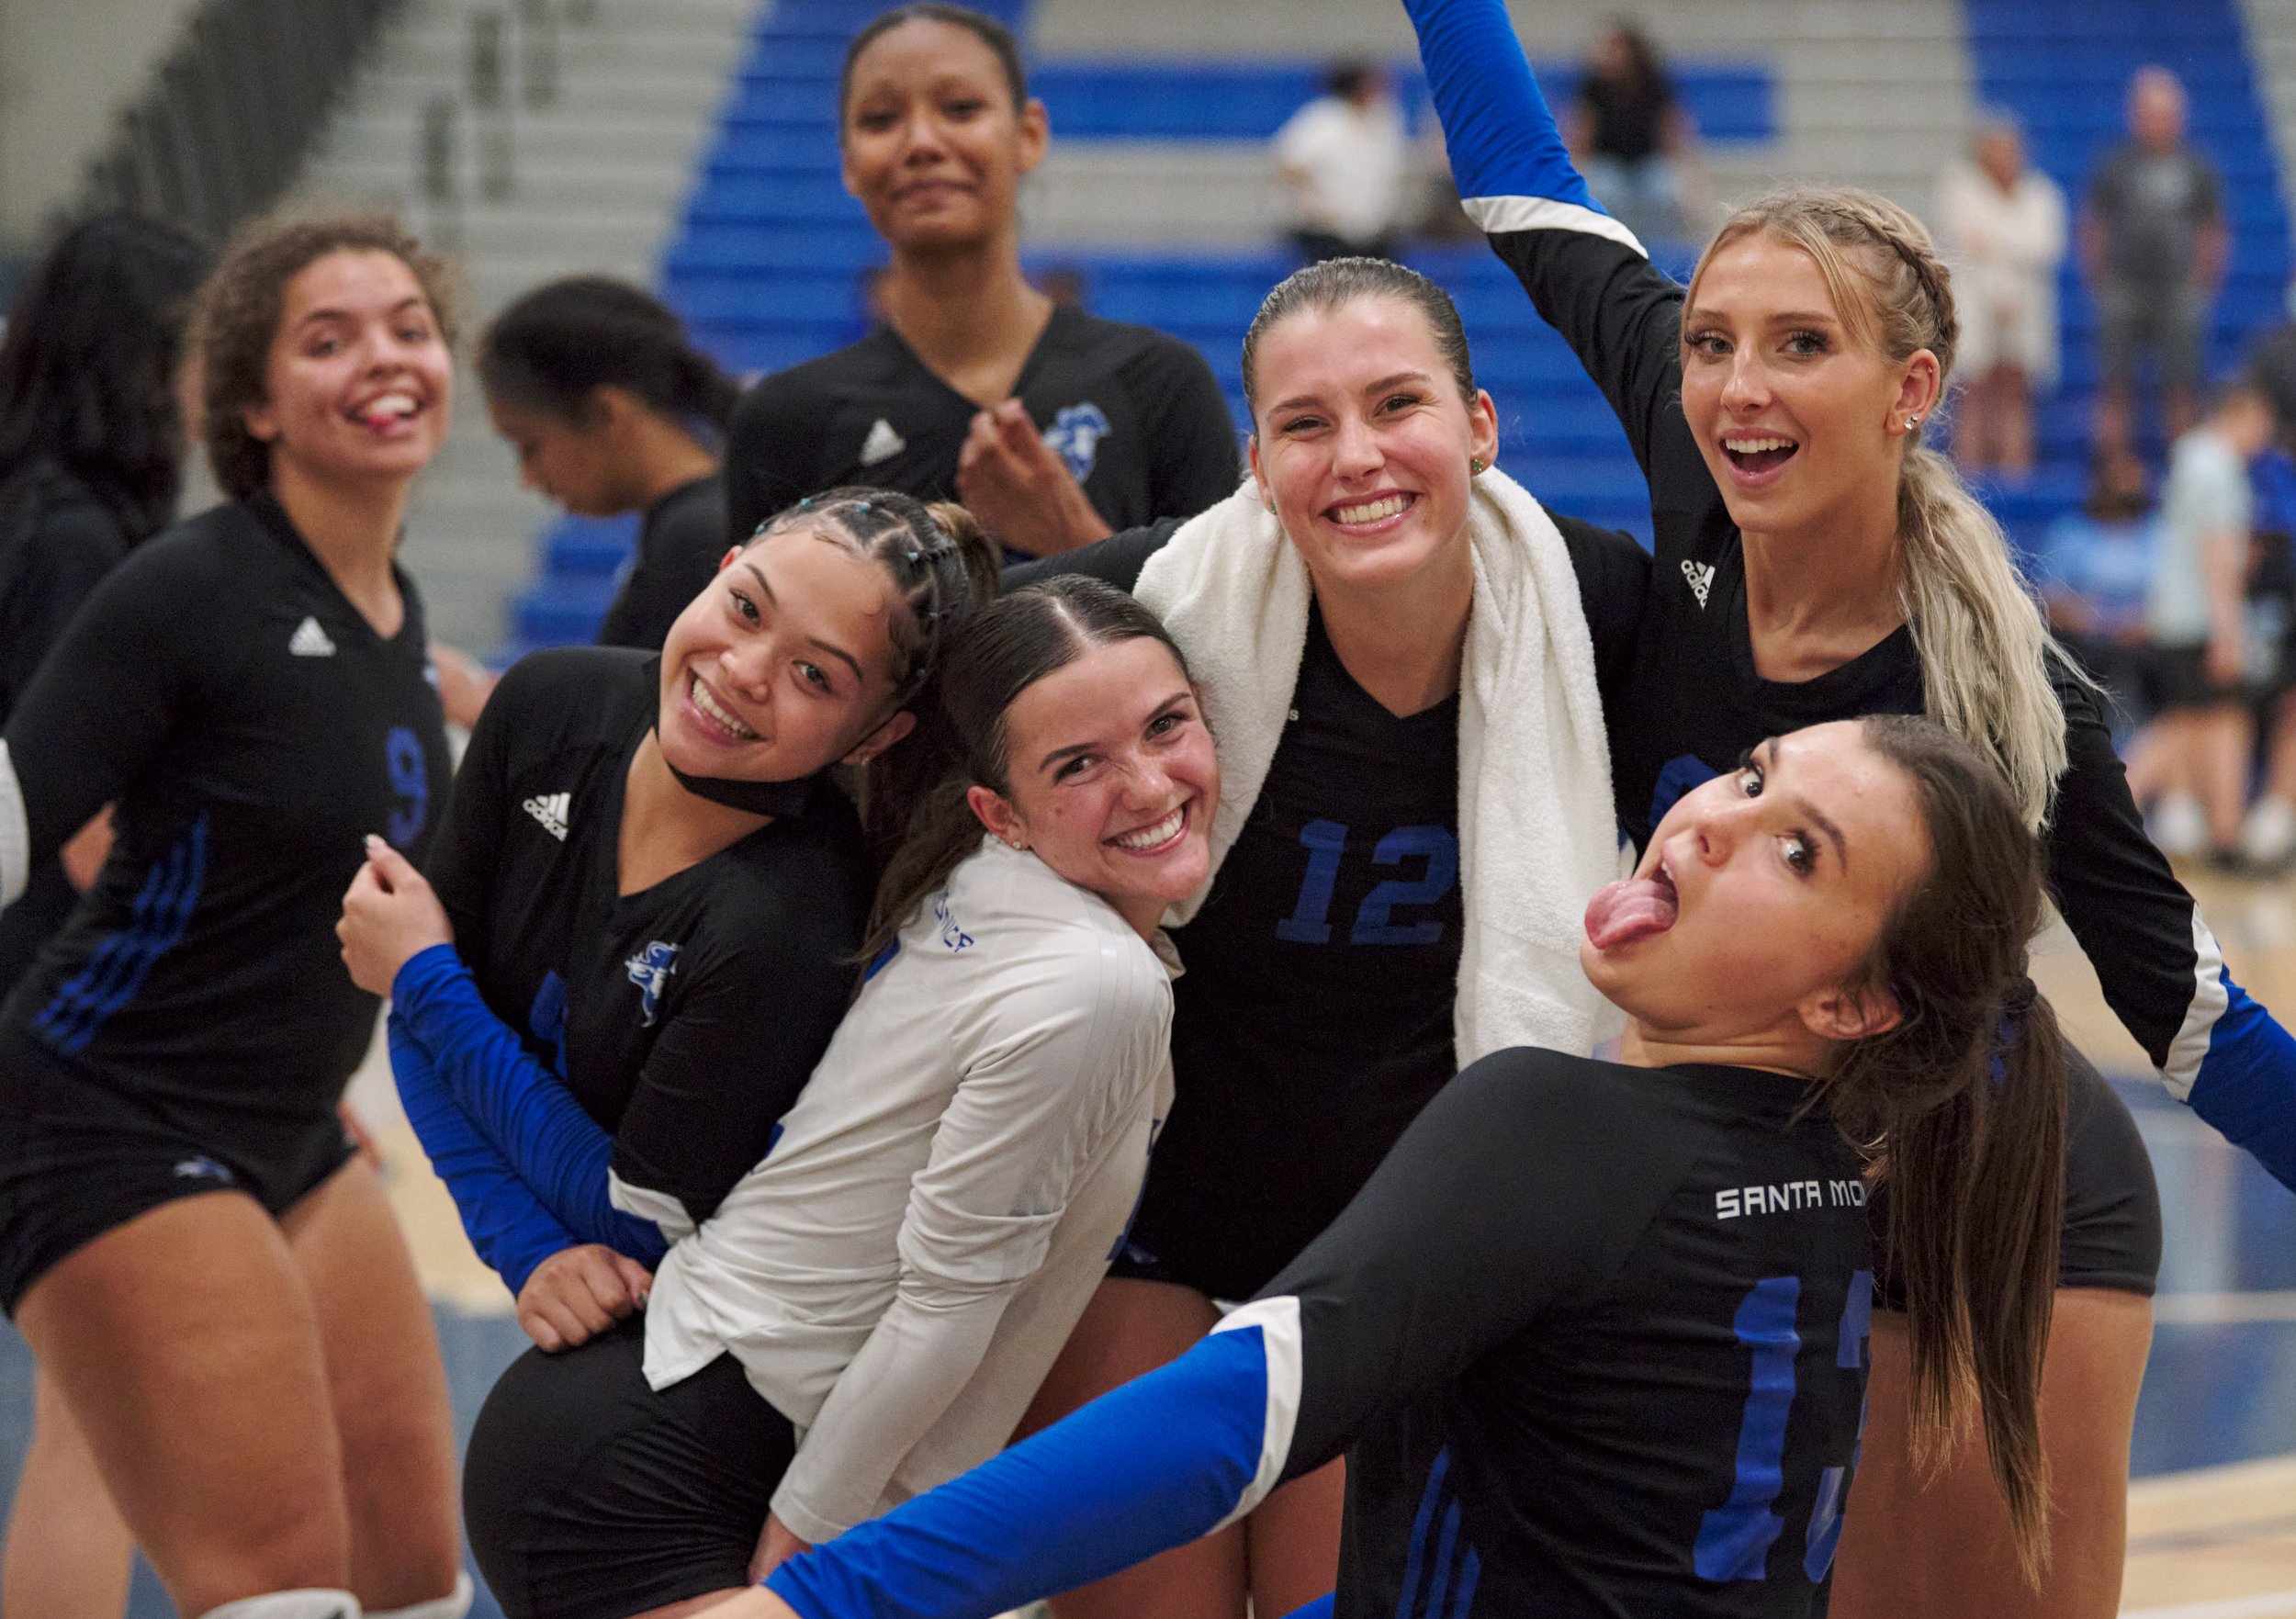  Members of the Santa Monica College Corsairs Women's Volleyball team ham it up for the camera during the match against the Bakersfield College Renegades on Wednesday, Sept. 28, 2022, at the Corsair Gym in Santa Monica, Calif. The Corsairs won 3-2. (